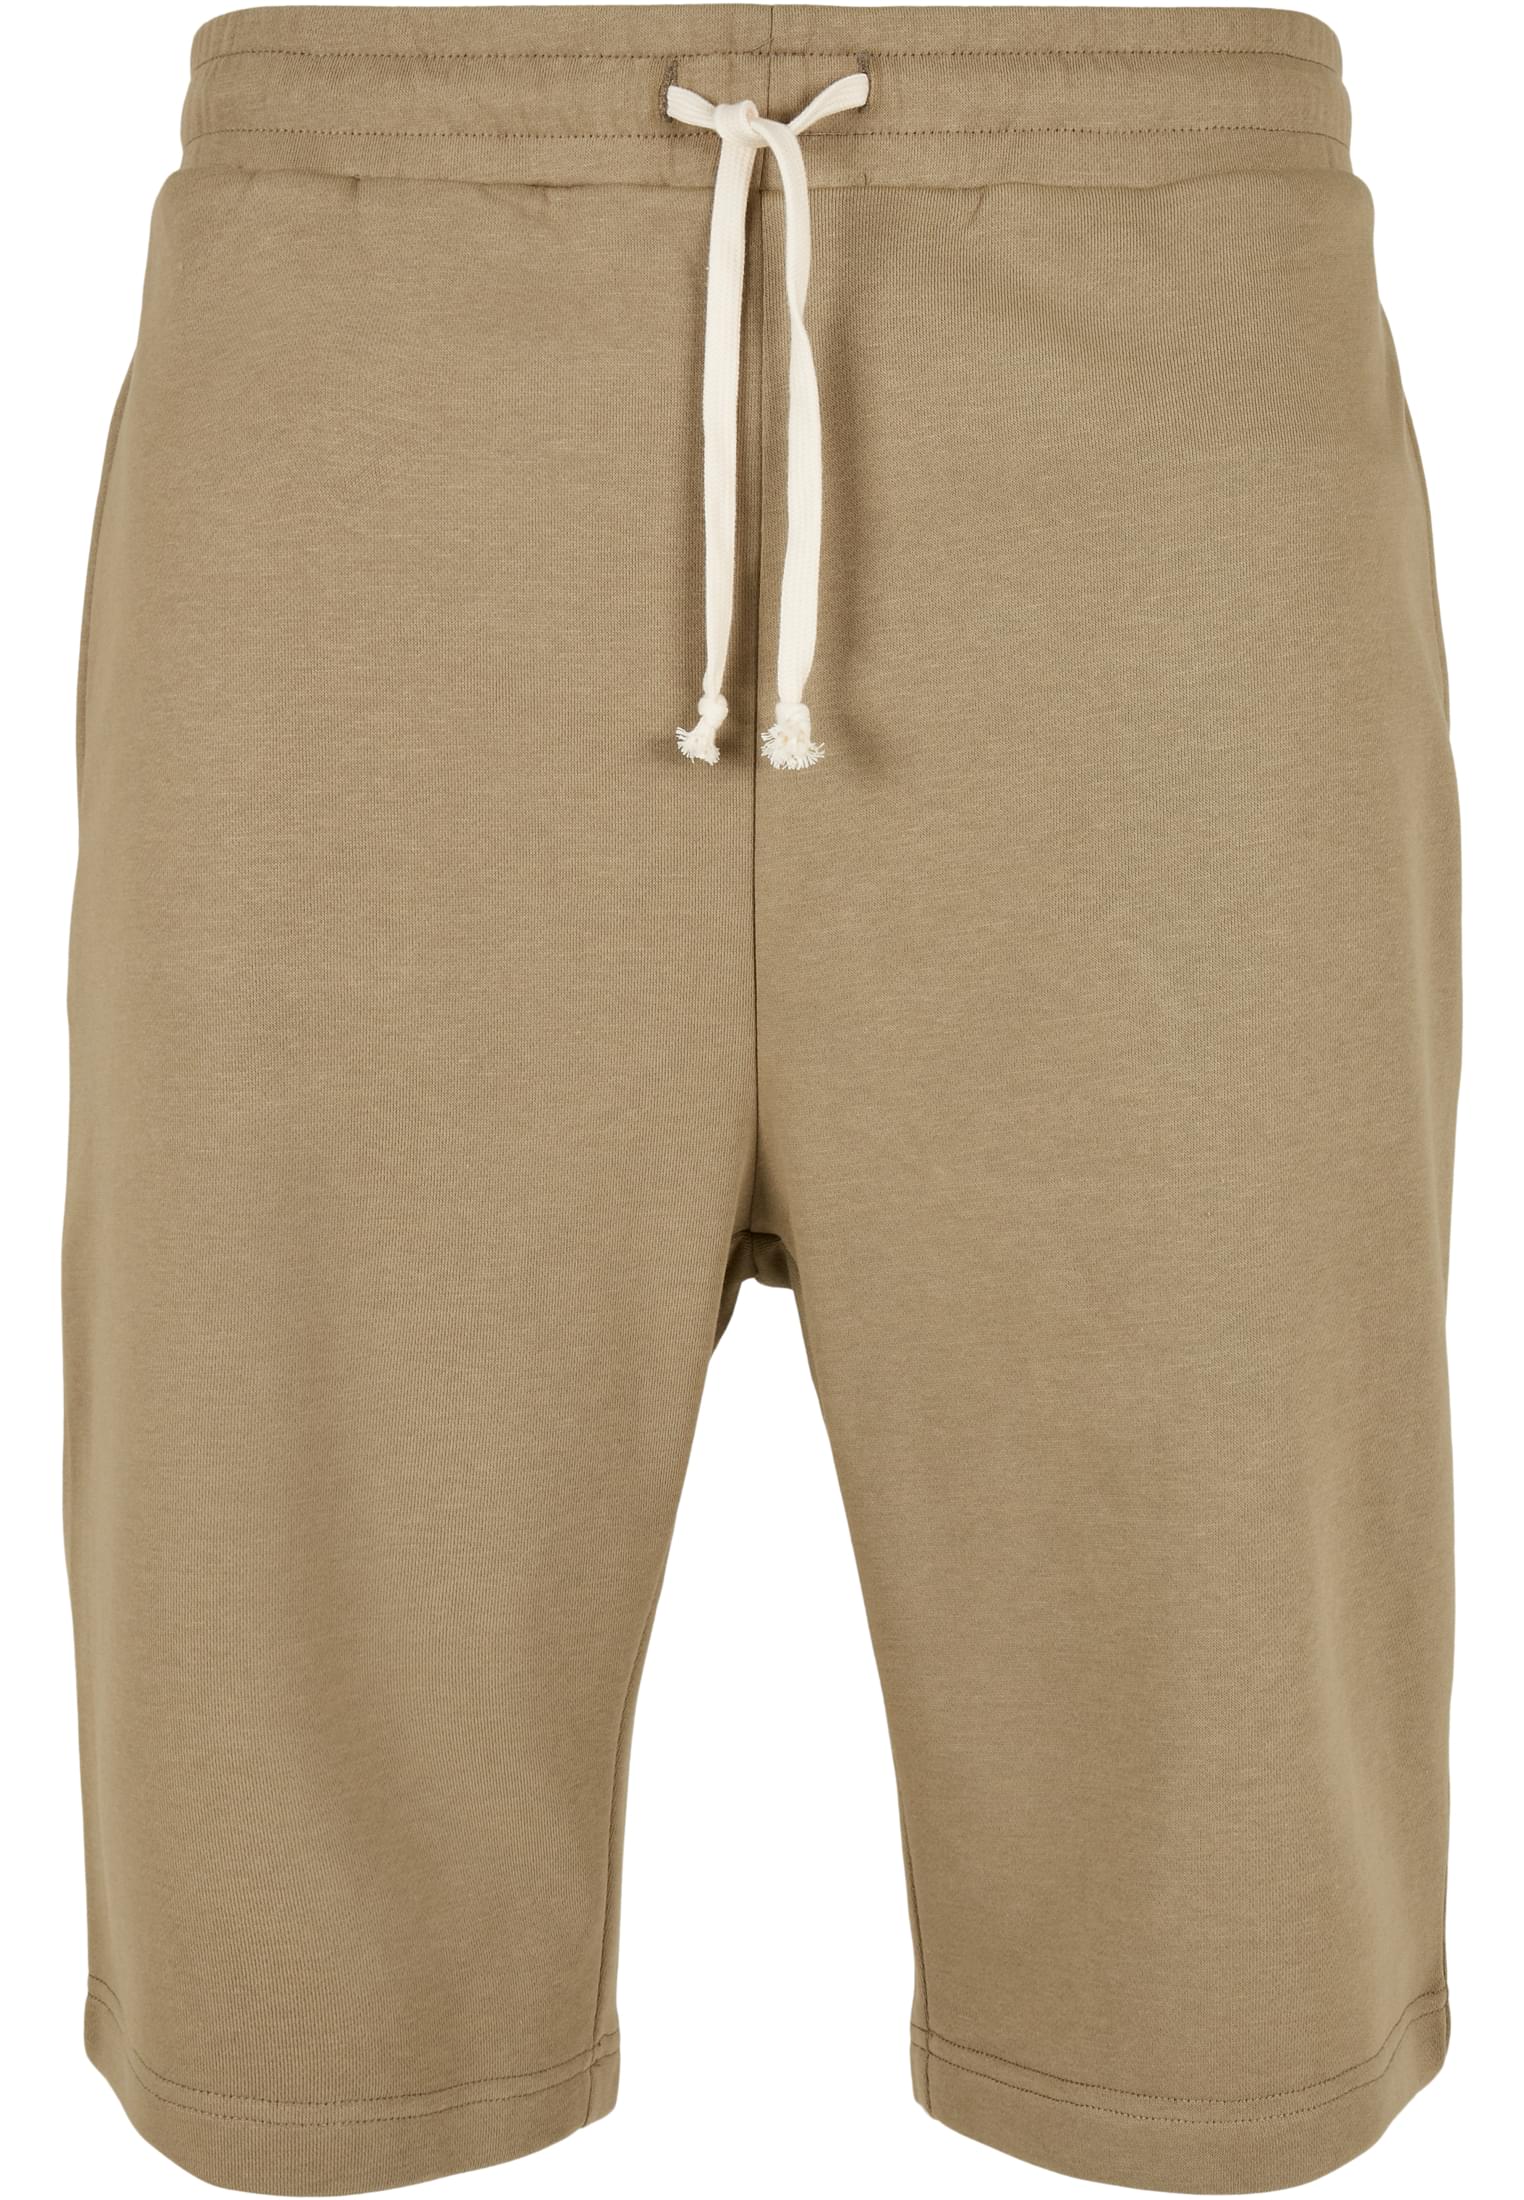 Trousers khaki shorts with low crotch